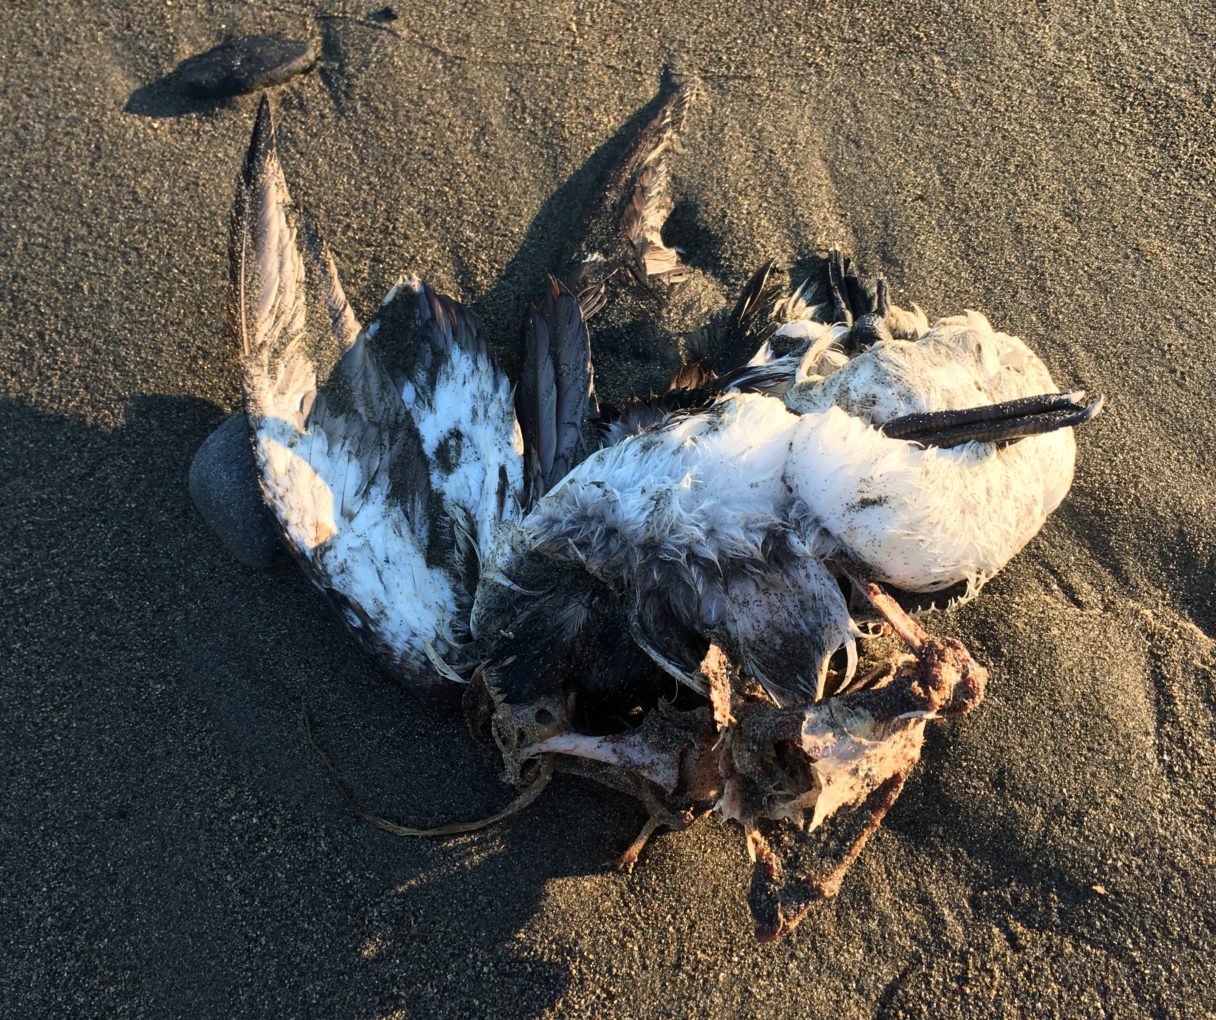 A dead murre that washed ashore in Nome in June 2018. (Photo by Zoe Grueskin, KNOM)